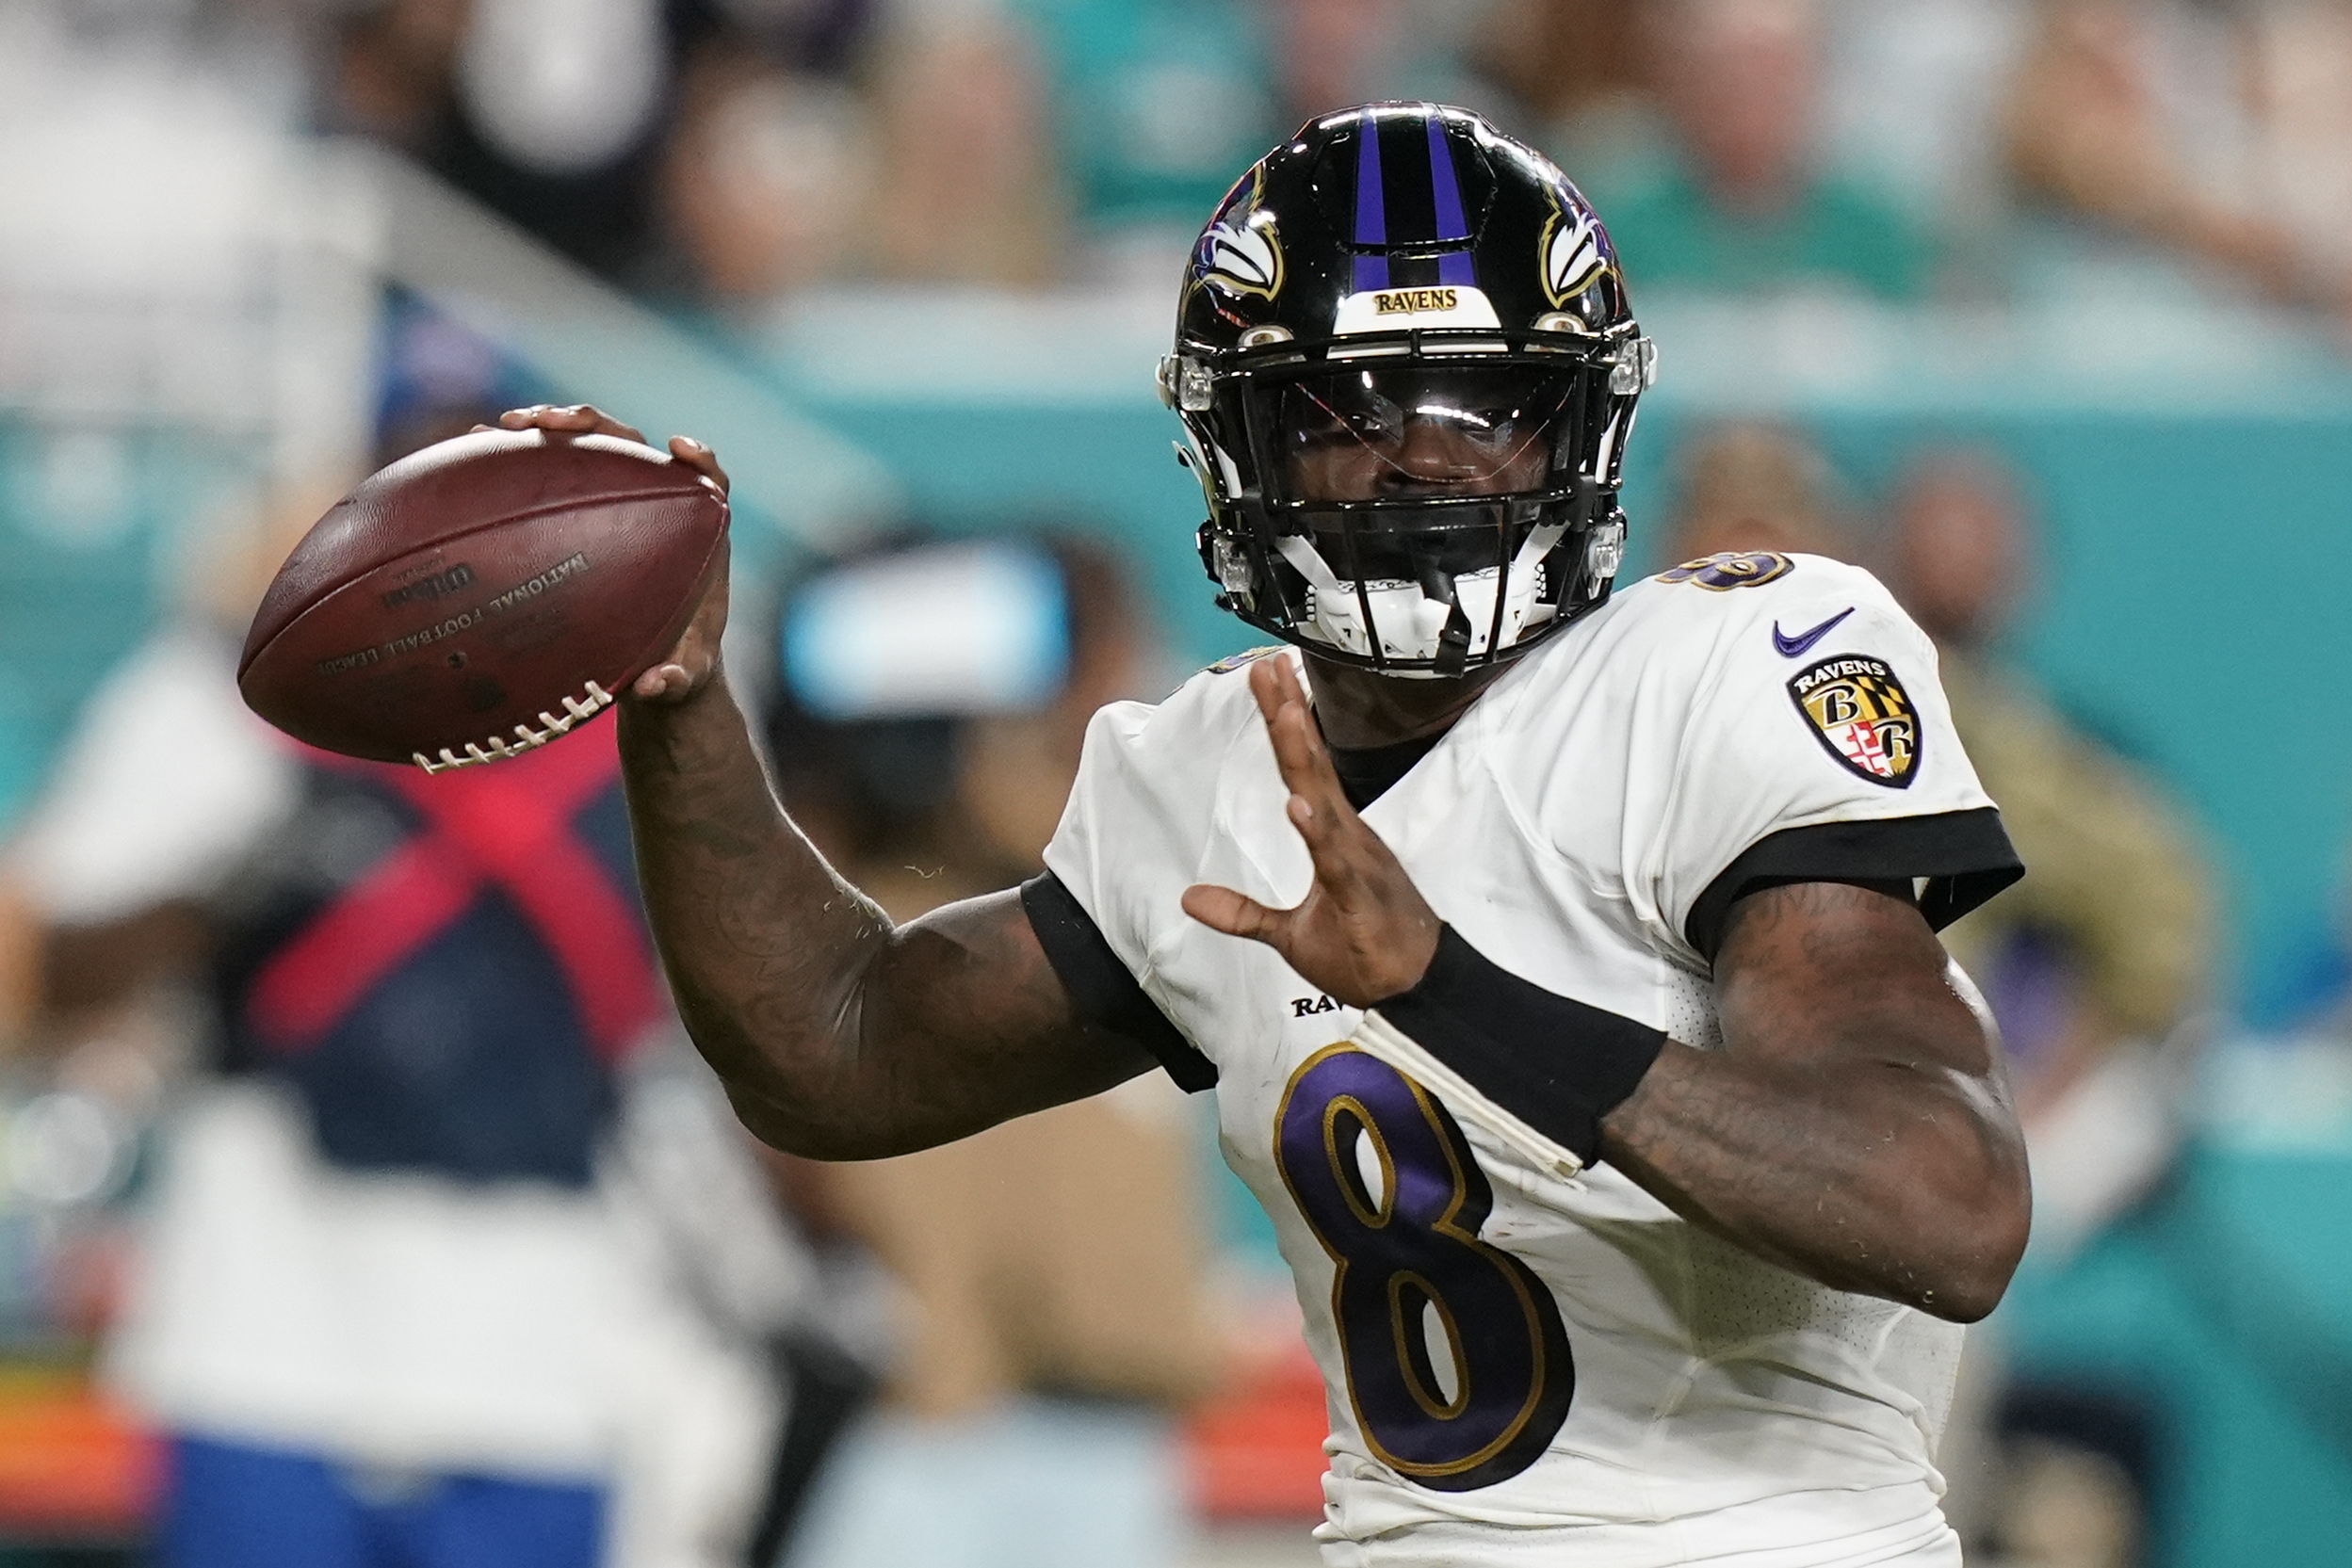 Breaking down the Ravens' player ratings in Madden 23 - Baltimore